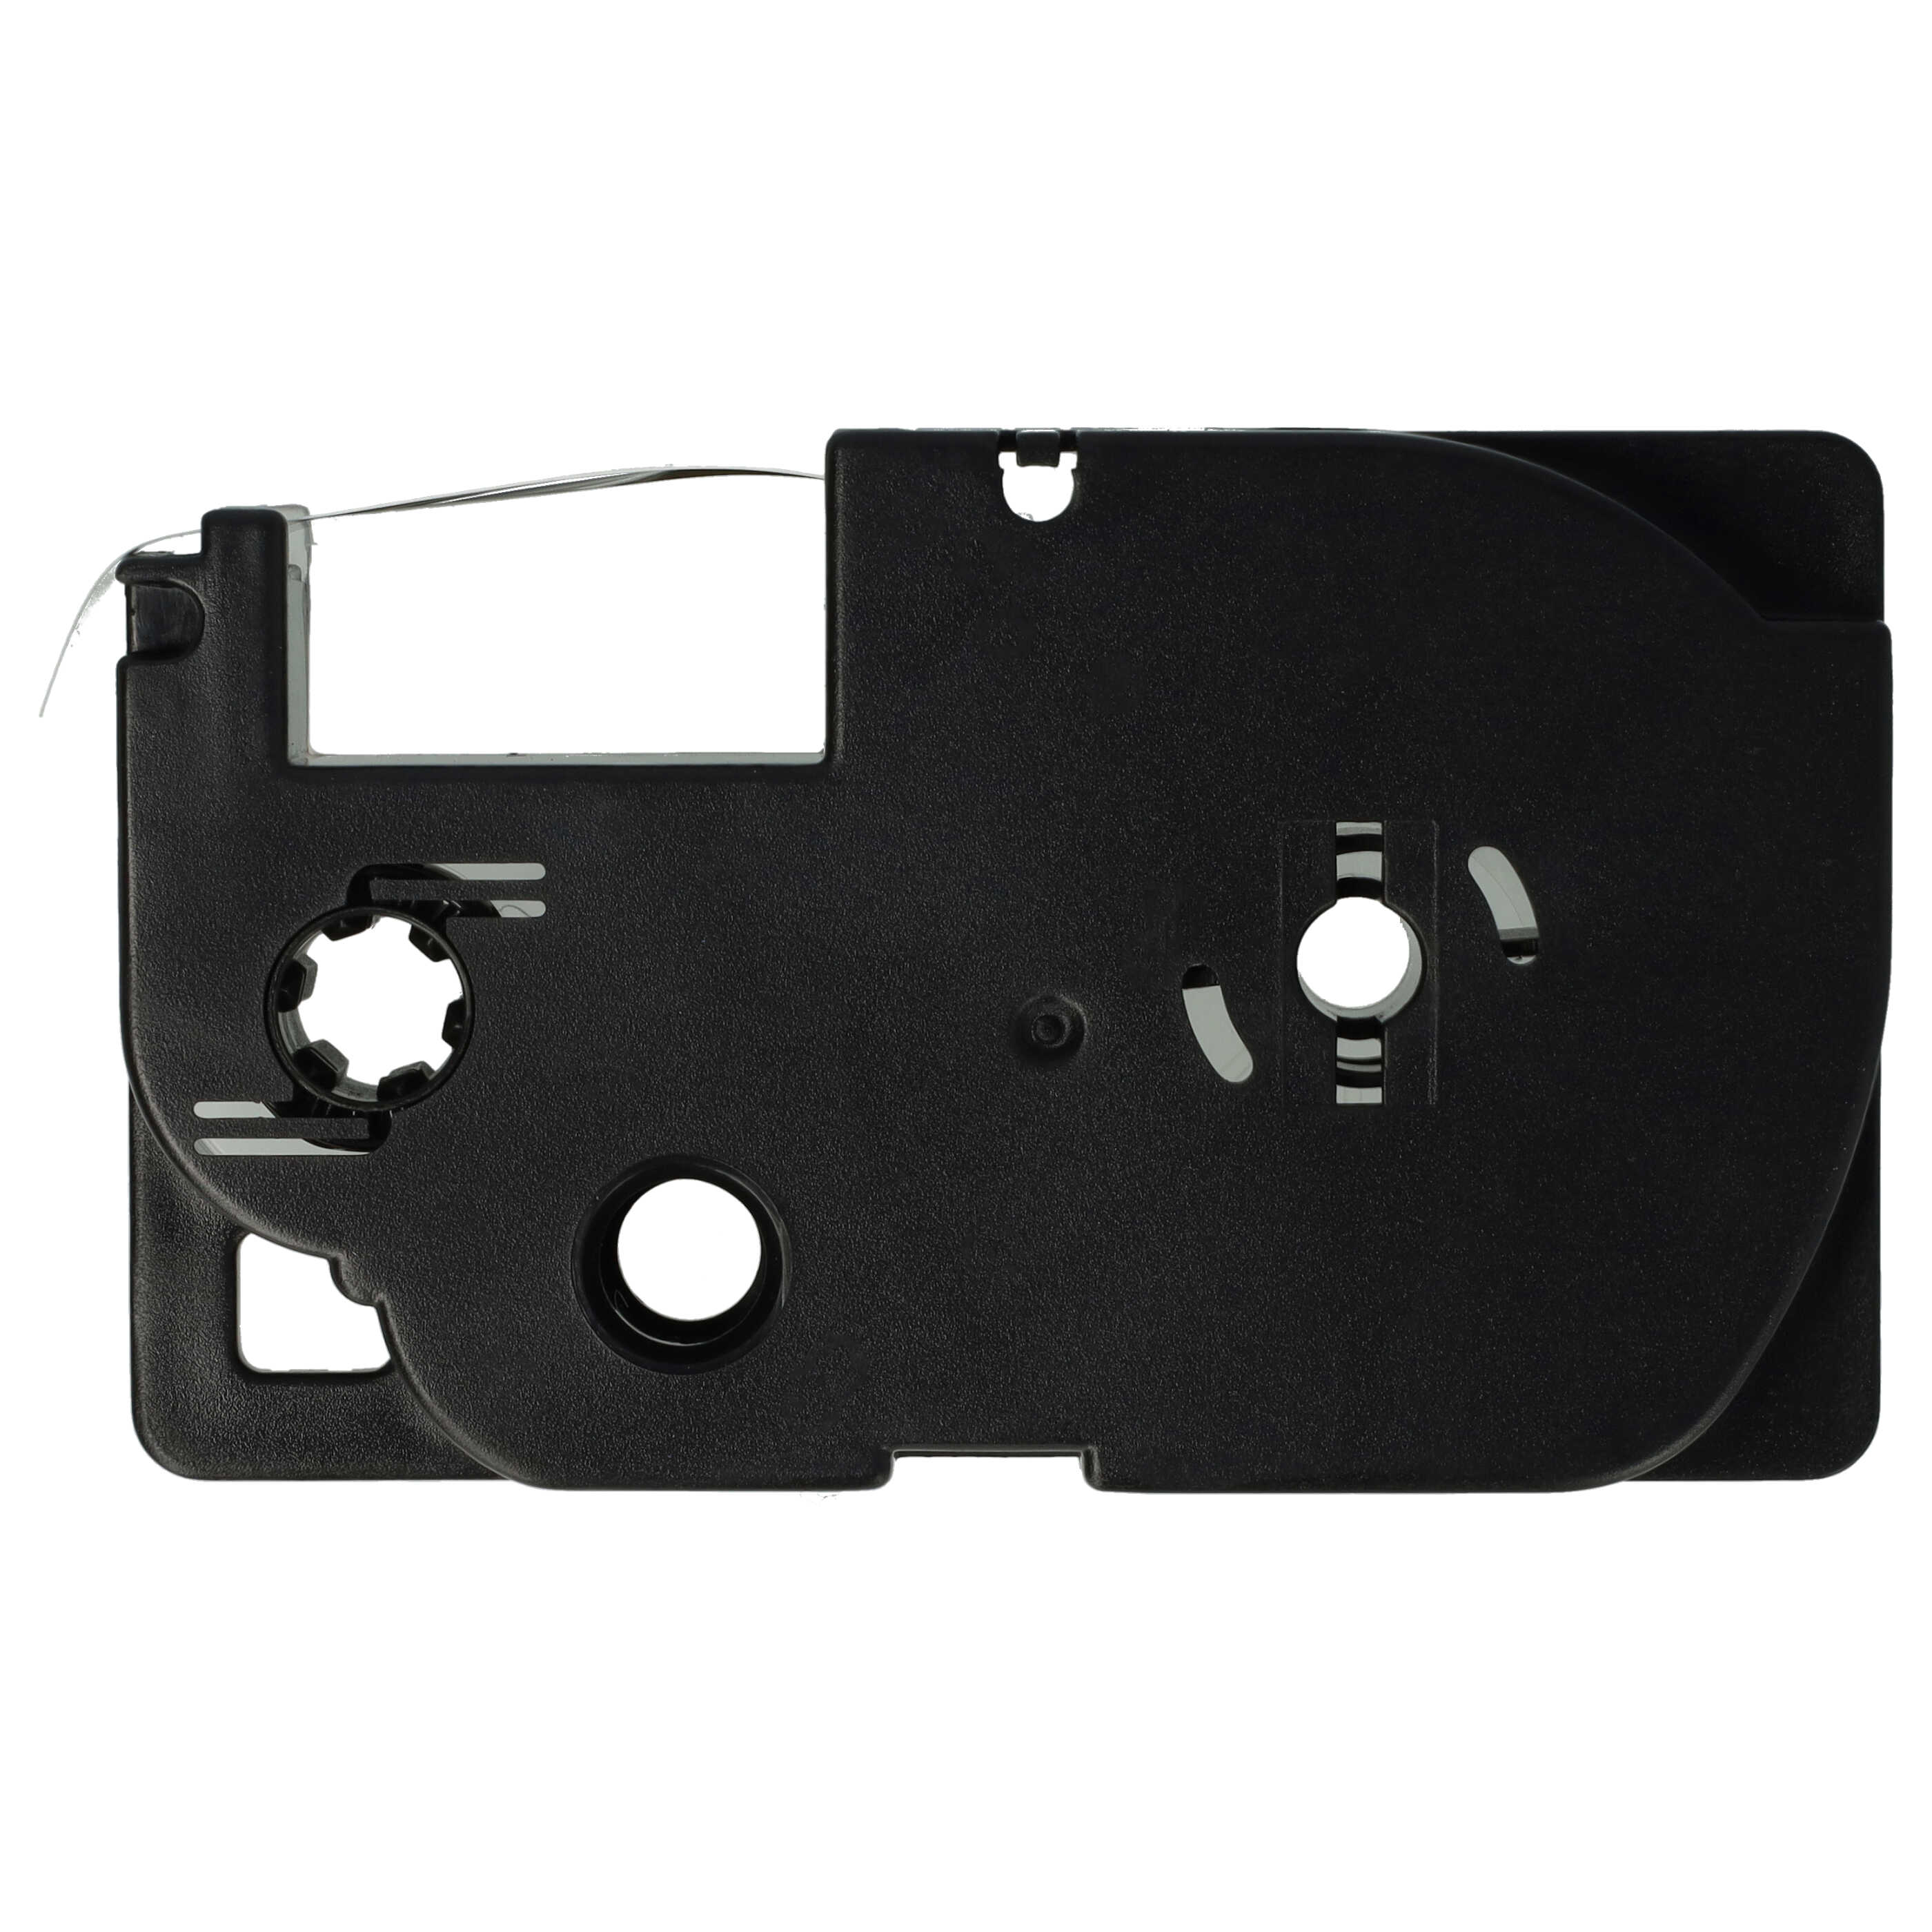 3x Label Tape as Replacement for Casio XR-9WE1, XR-9WE - 9 mm Black to White